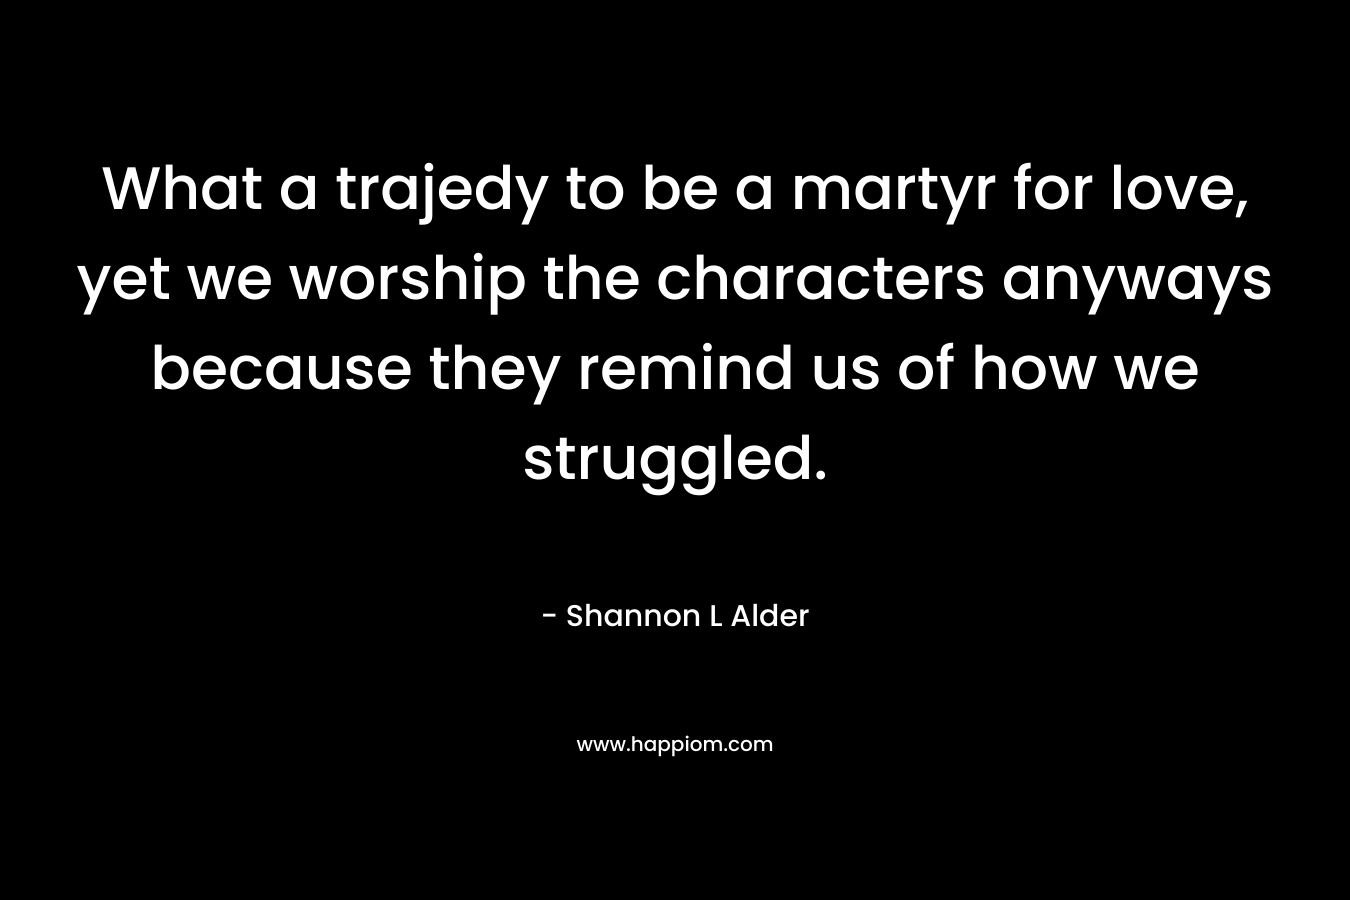 What a trajedy to be a martyr for love, yet we worship the characters anyways because they remind us of how we struggled. – Shannon L Alder